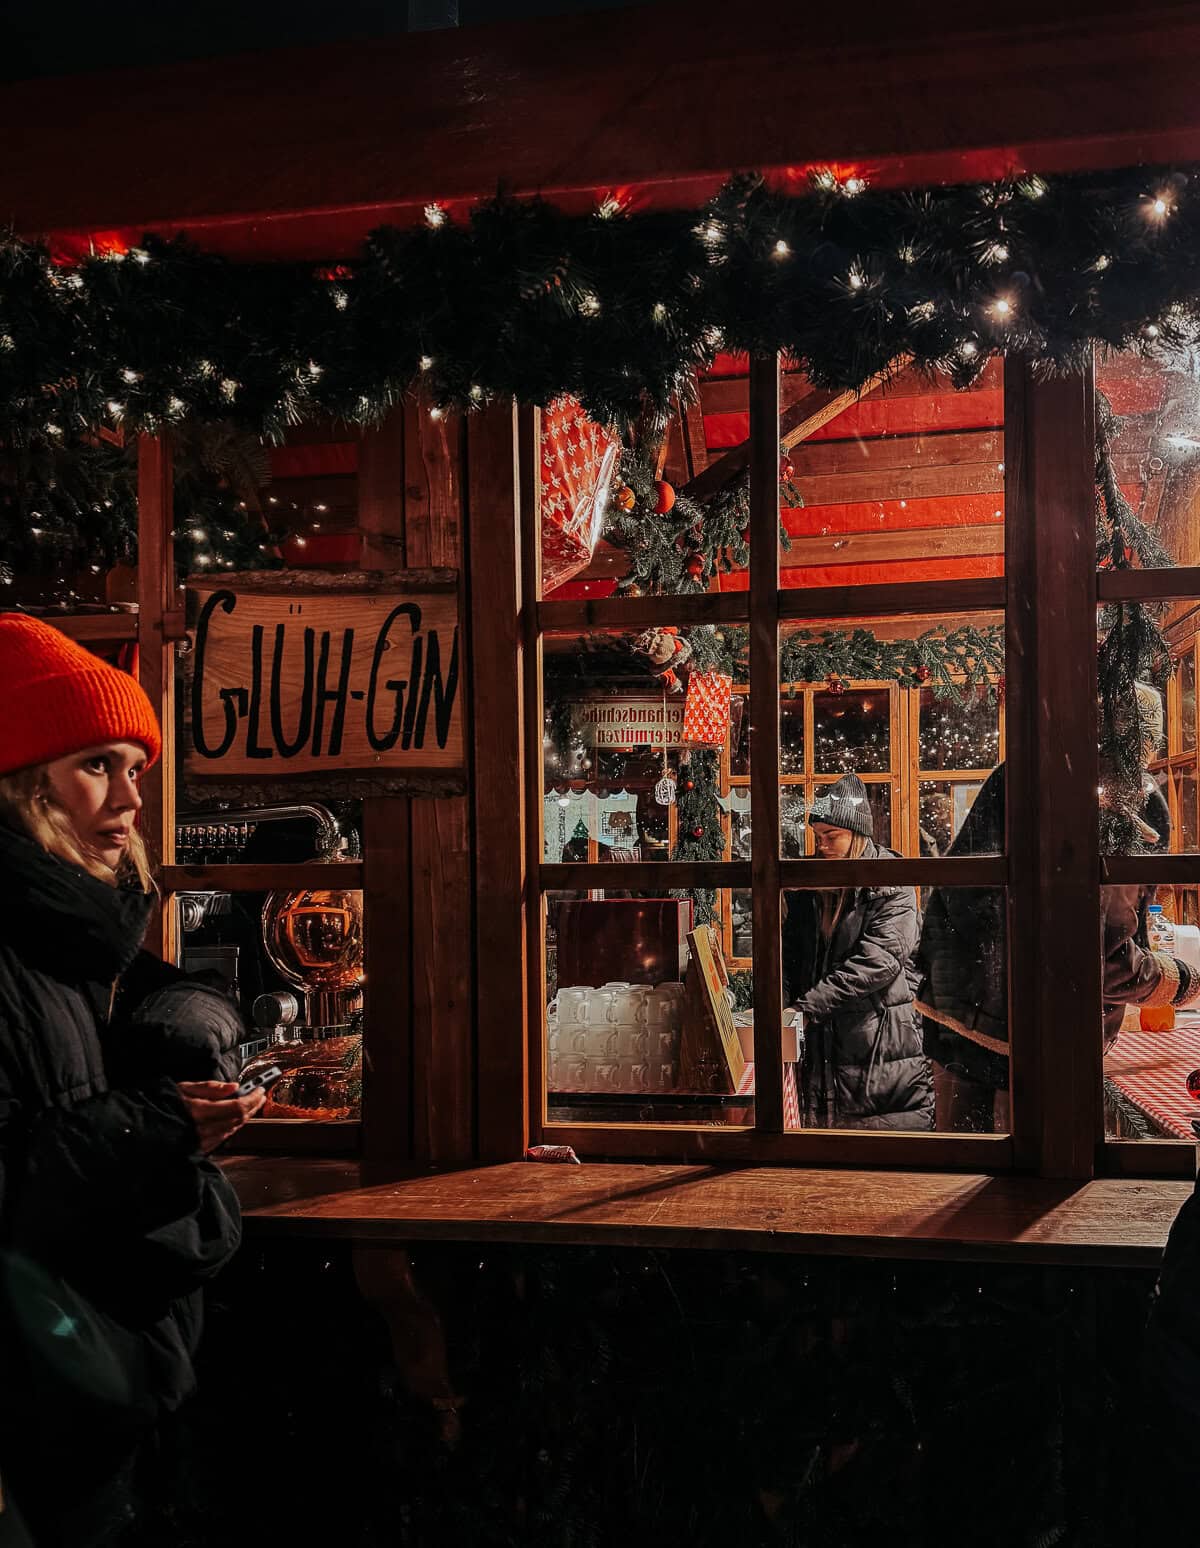 A detailed view of a market stall window decorated with festive garlands and a sign reading 'GLÜH-GIN.' Inside, patrons are visible interacting and browsing holiday-themed items, adding to the warm, festive mood.